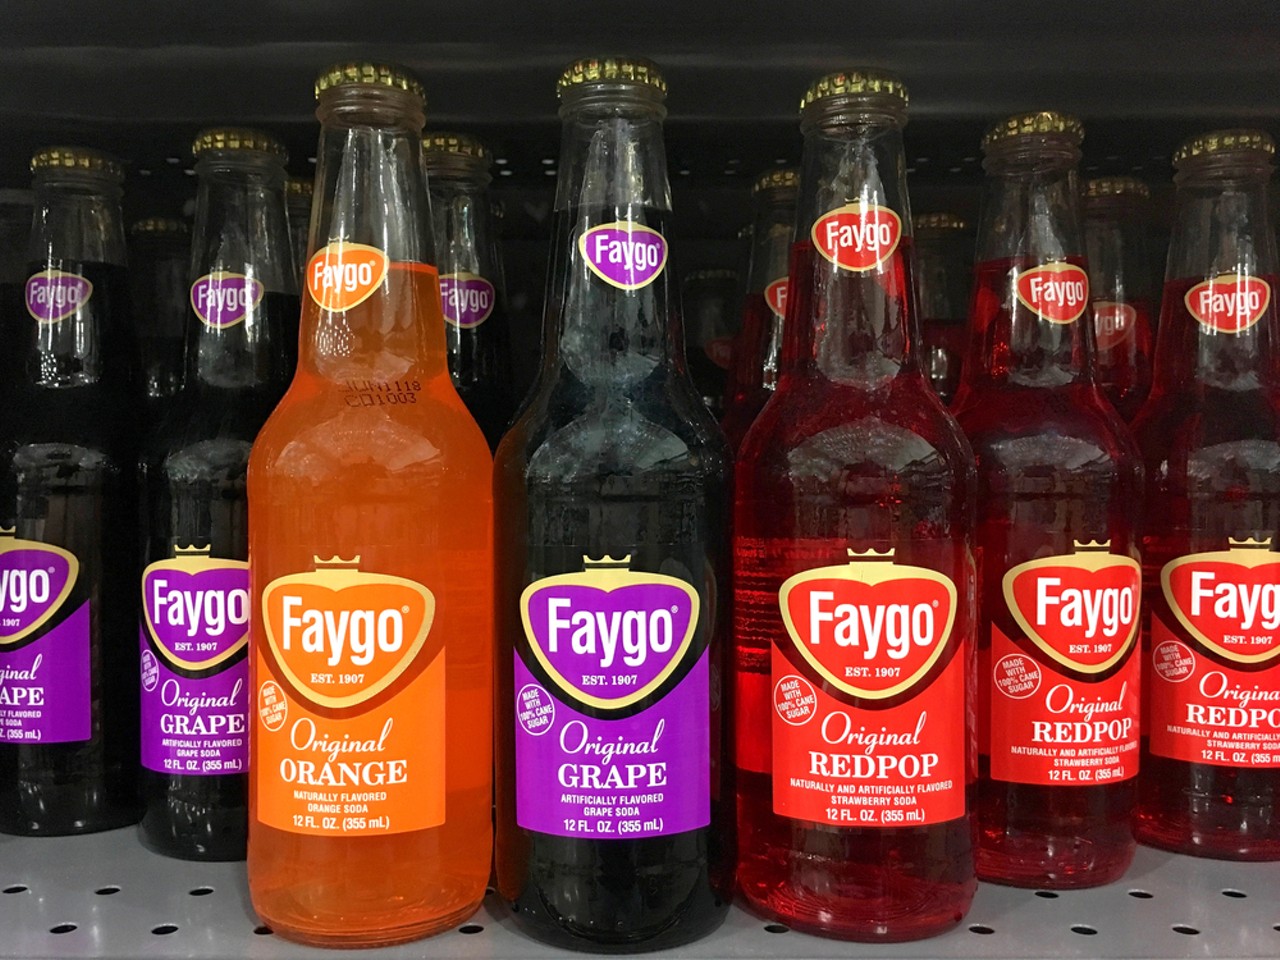 Detroit pop
First of all, we call it &#147;pop&#148; here, not &#147;soda.&#148; Where does one even begin? Faygo, the brightly colored pop, is a Michigan classic. From black cherry to the original red pop, Faygo has been staining lips for decades and you would be hard-pressed to track down a bottle of this bubbly anywhere else. We totally get why the Juggalos have adopted Faygo as their official family drink. Oh &#151; and don't forget Vernors. Though the ginger ale brand has gone national, the Boston Cooler still remains a beloved Detroit treat. Pop a can of Vernors, add vanilla ice cream, and enjoy &#151; because everyone else is missing out. Hell, we even use Vernors as a medicinal elixir here when we&#146;re feeling under the weather.
Sheila Fitzgerald / Shutterstock.com